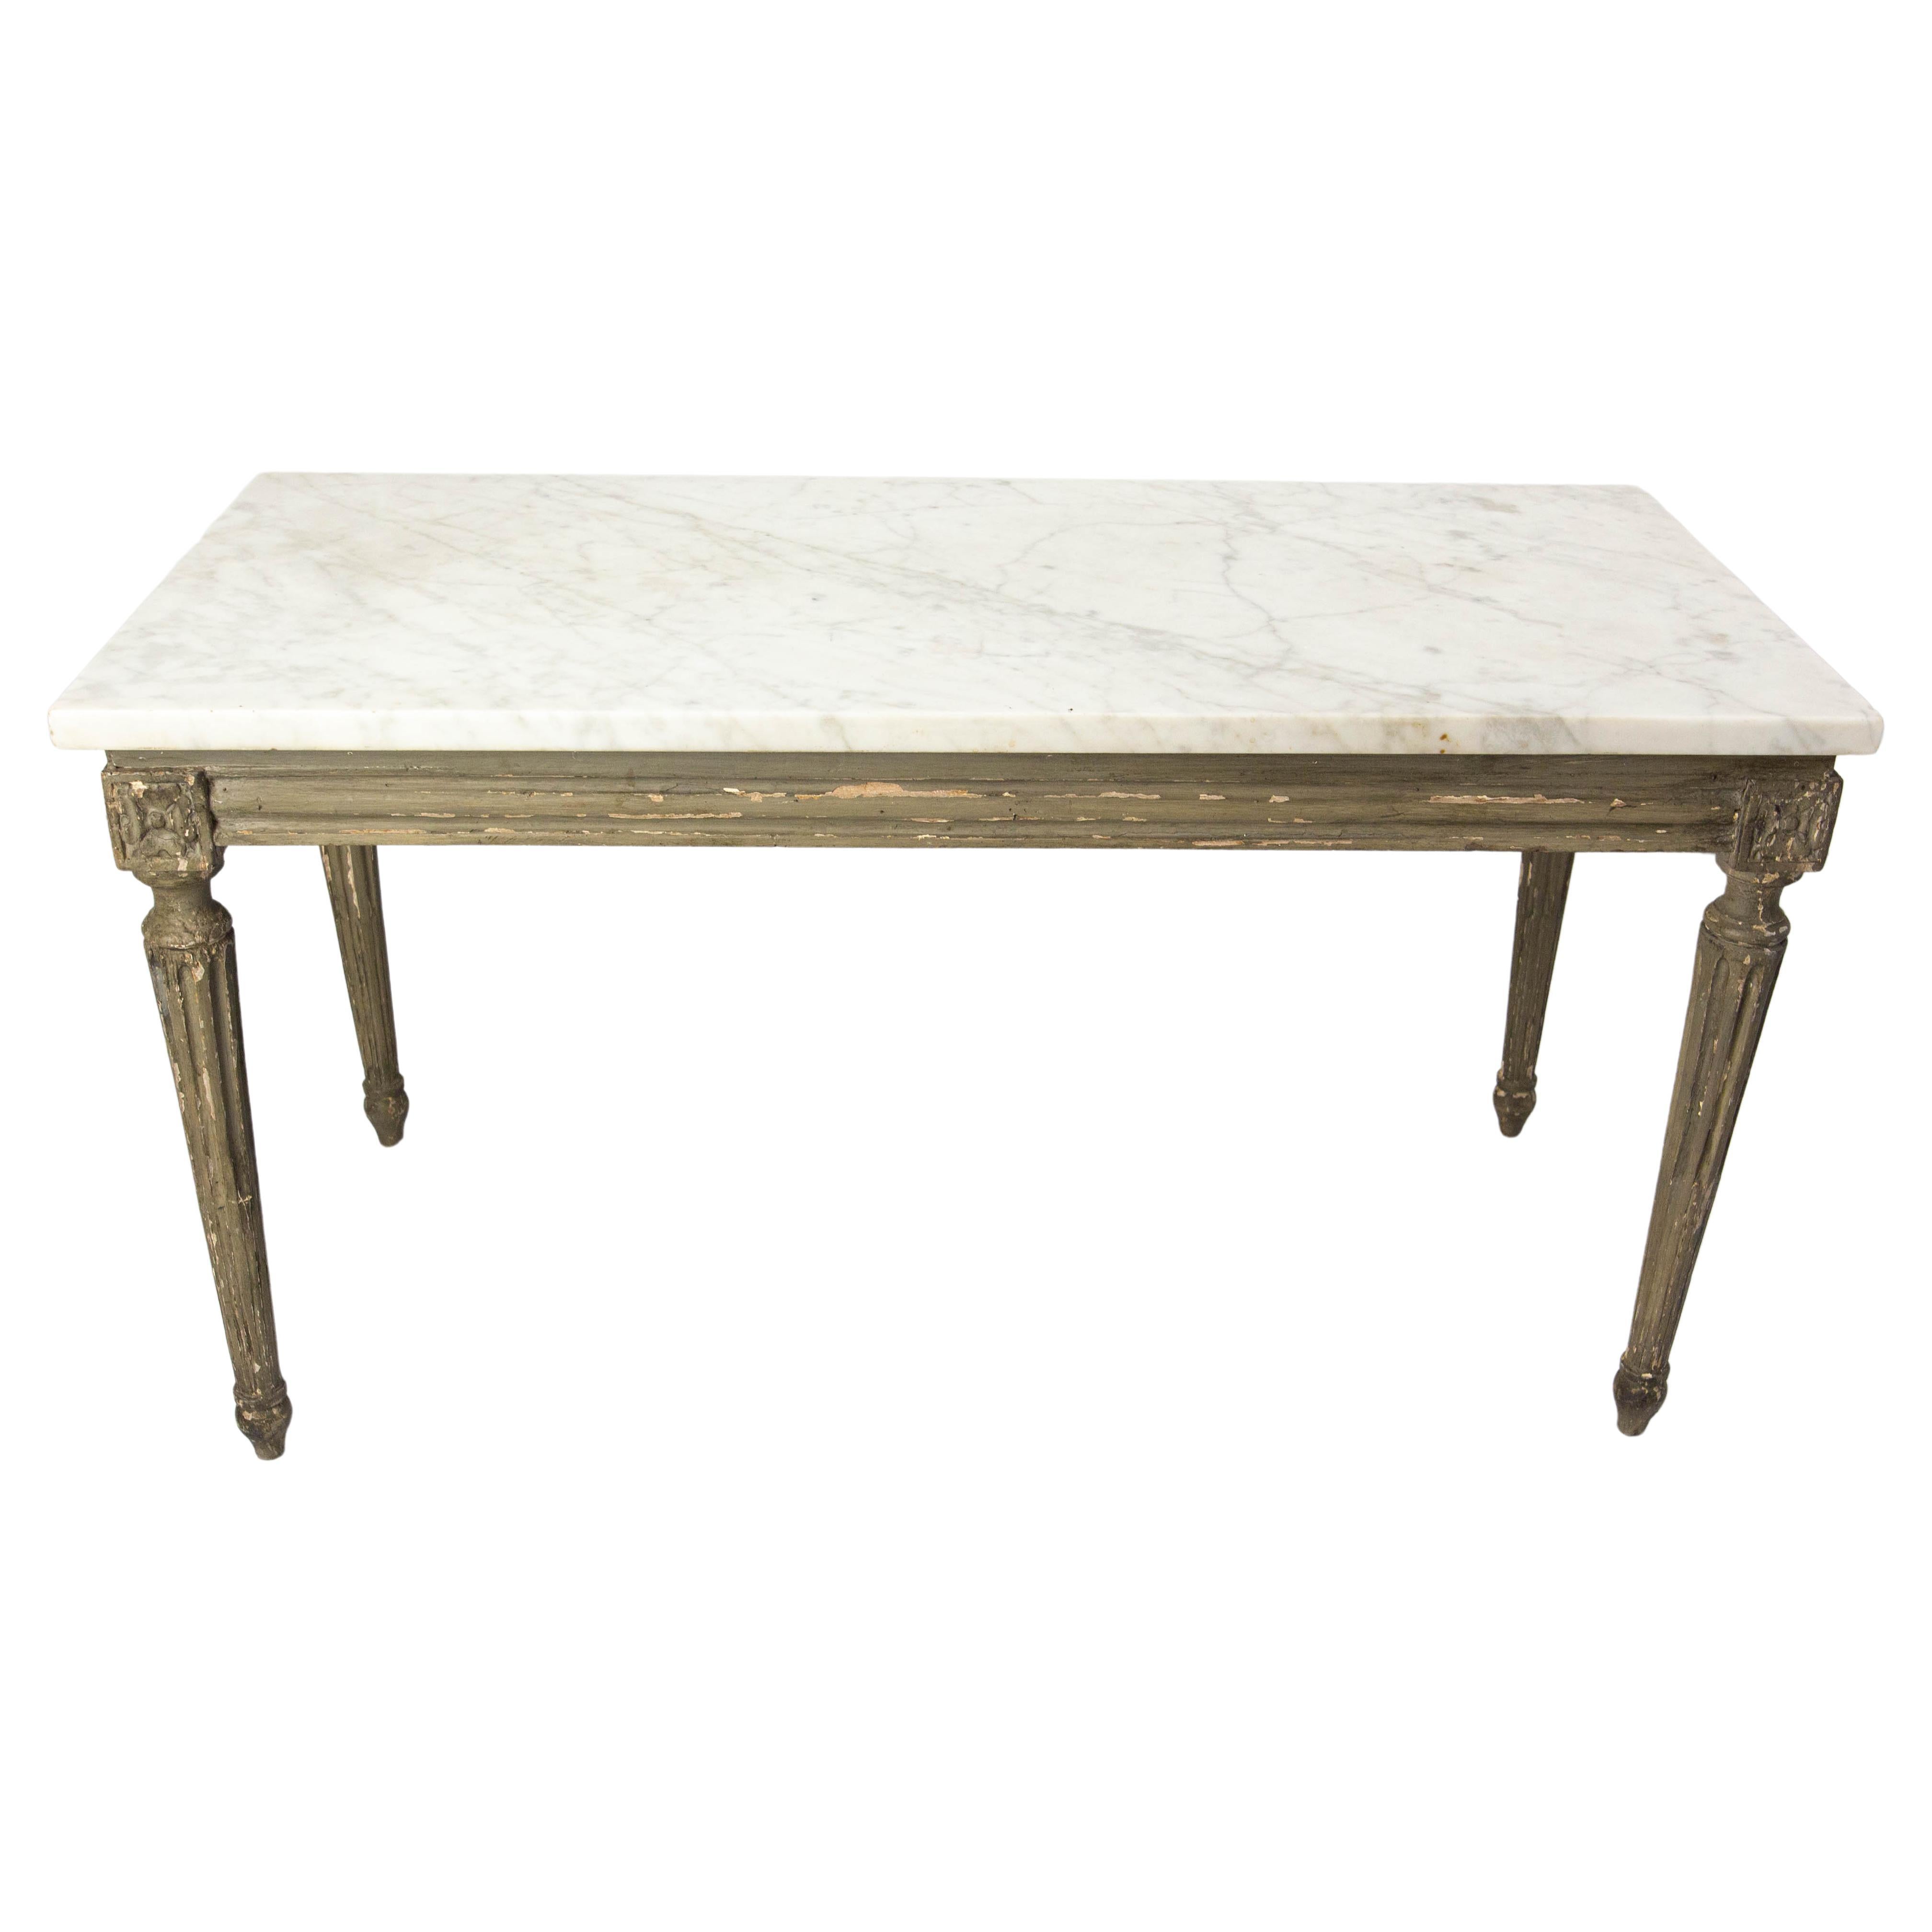 French Louis XVI Painted Wood & Marble Top Coffee Table, late 19th Century